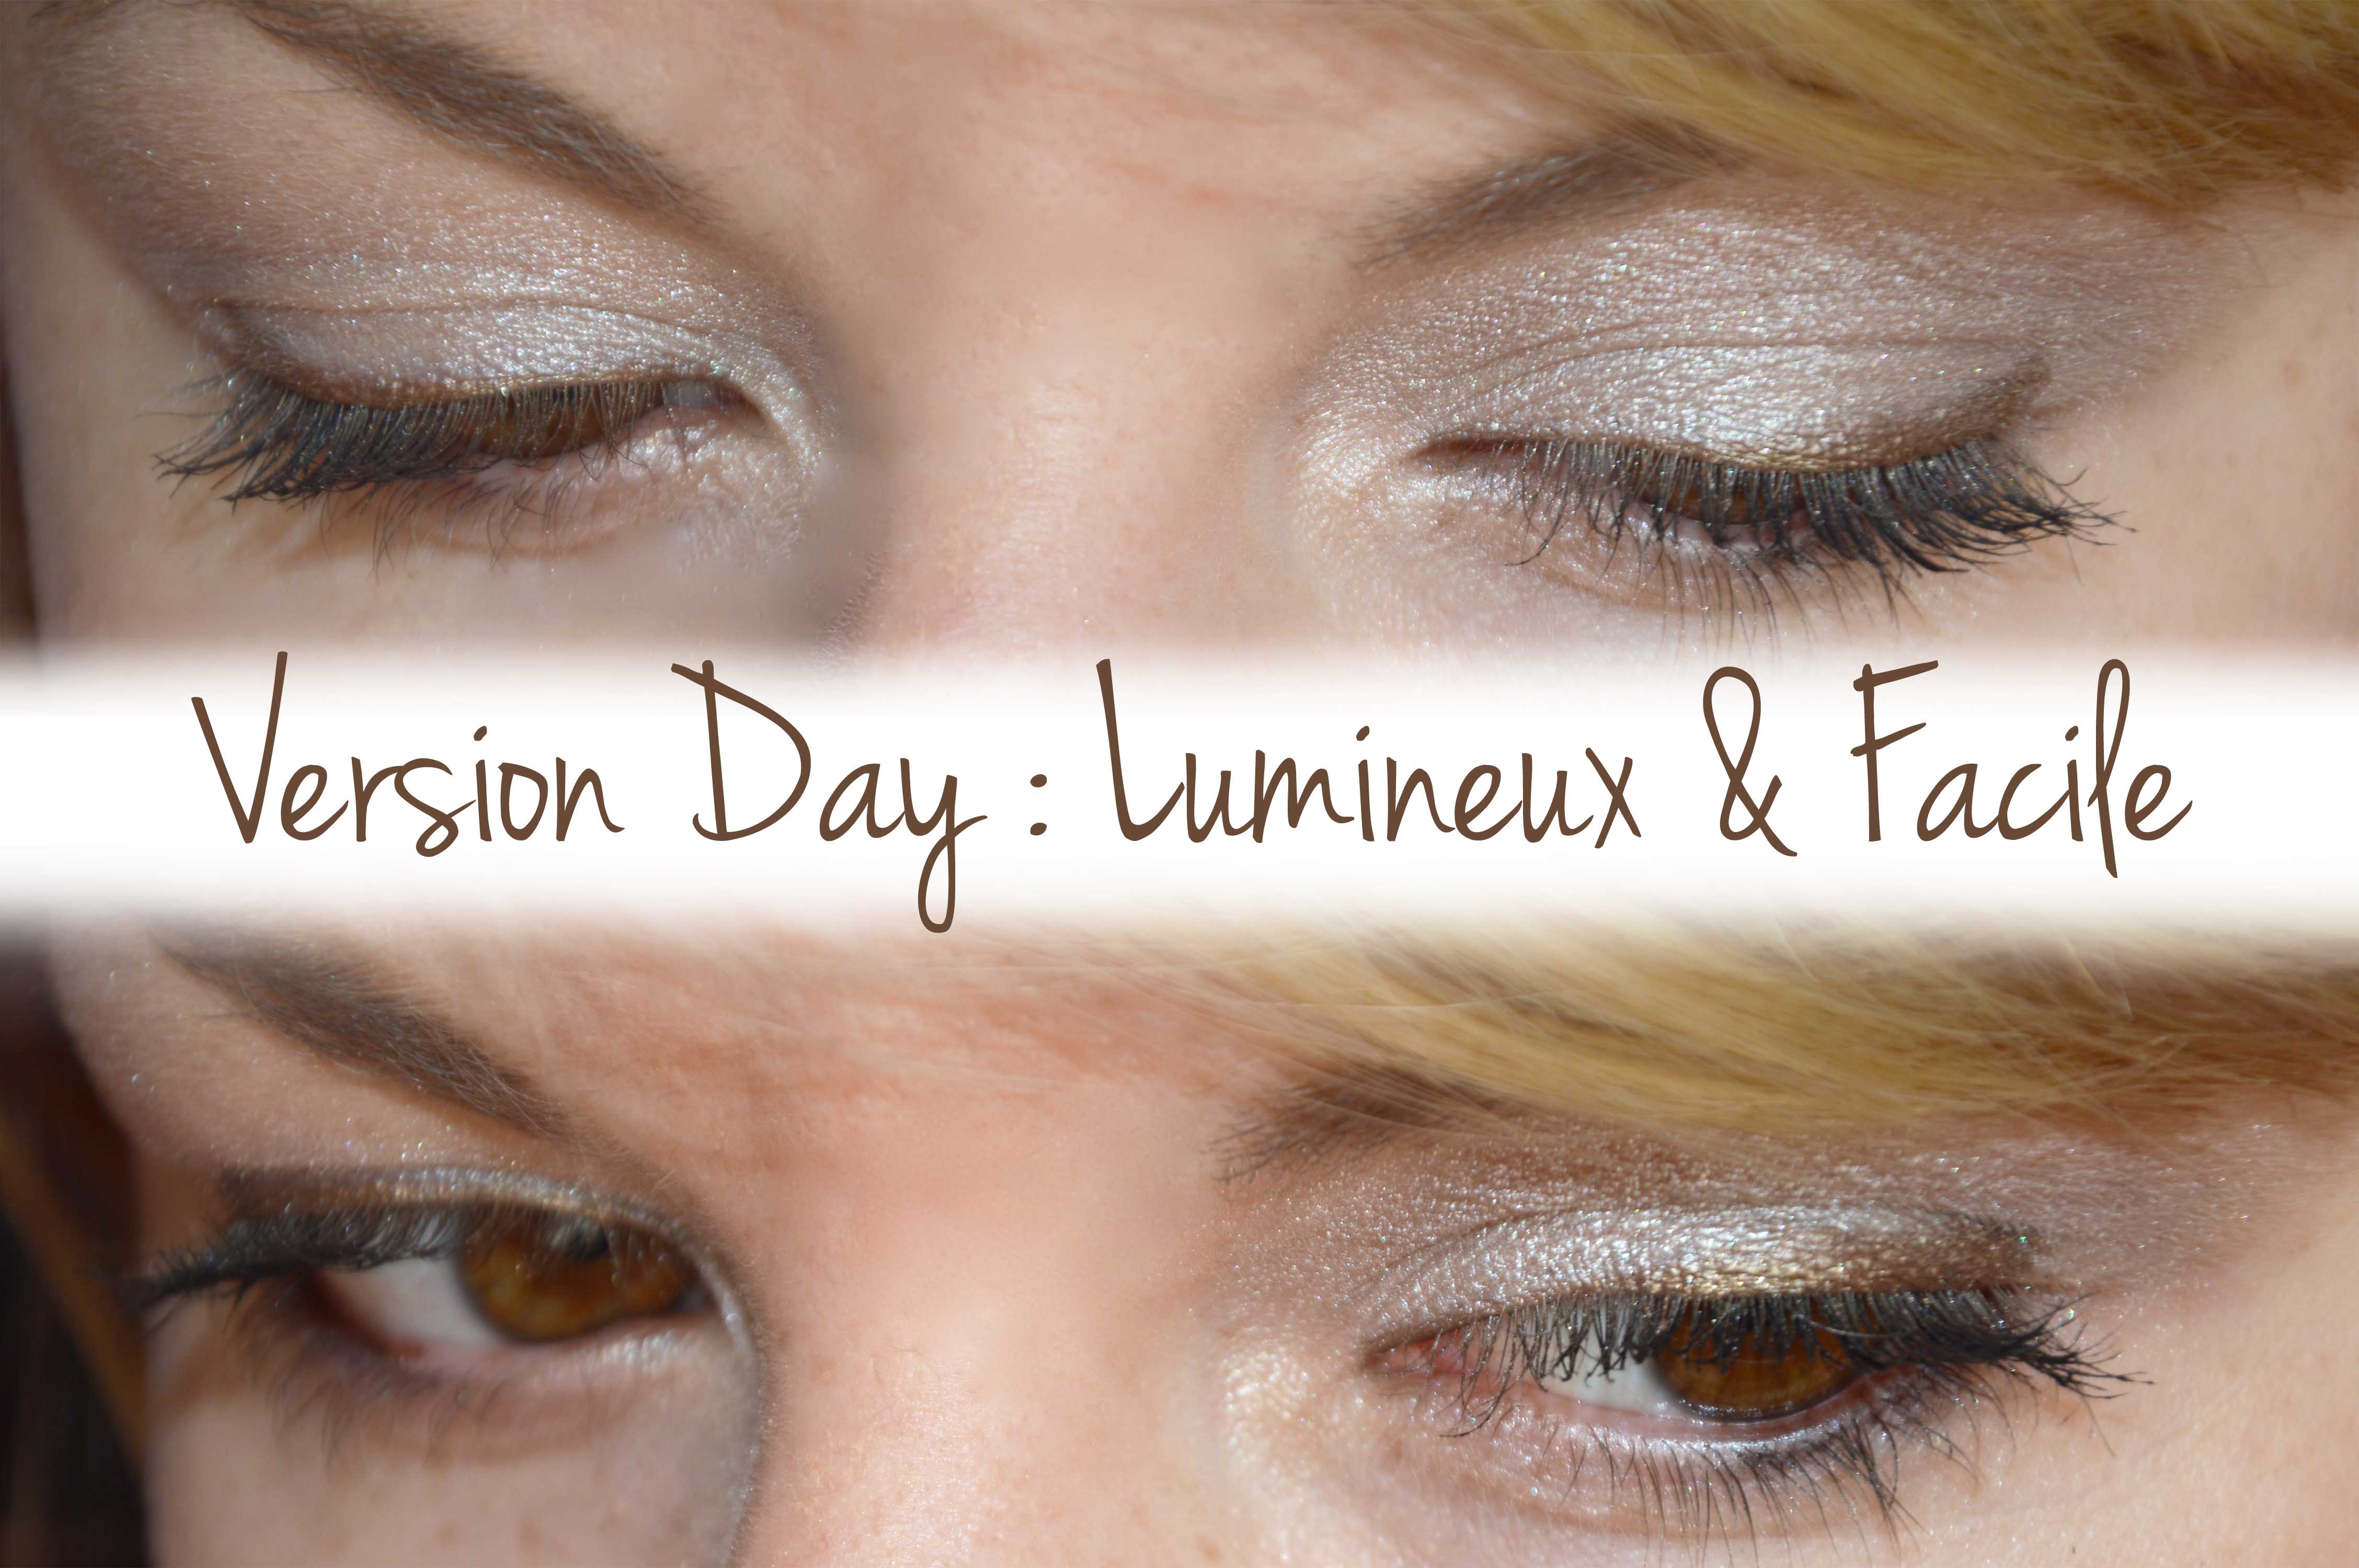 ALITTLEB_BLOG_BEAUTE_RESERVE_NATURELLE_DUO_OMBRES_A_PAUPIERES_PLATINIUM_ILLUSION_OMBRES_VERSION_DAY